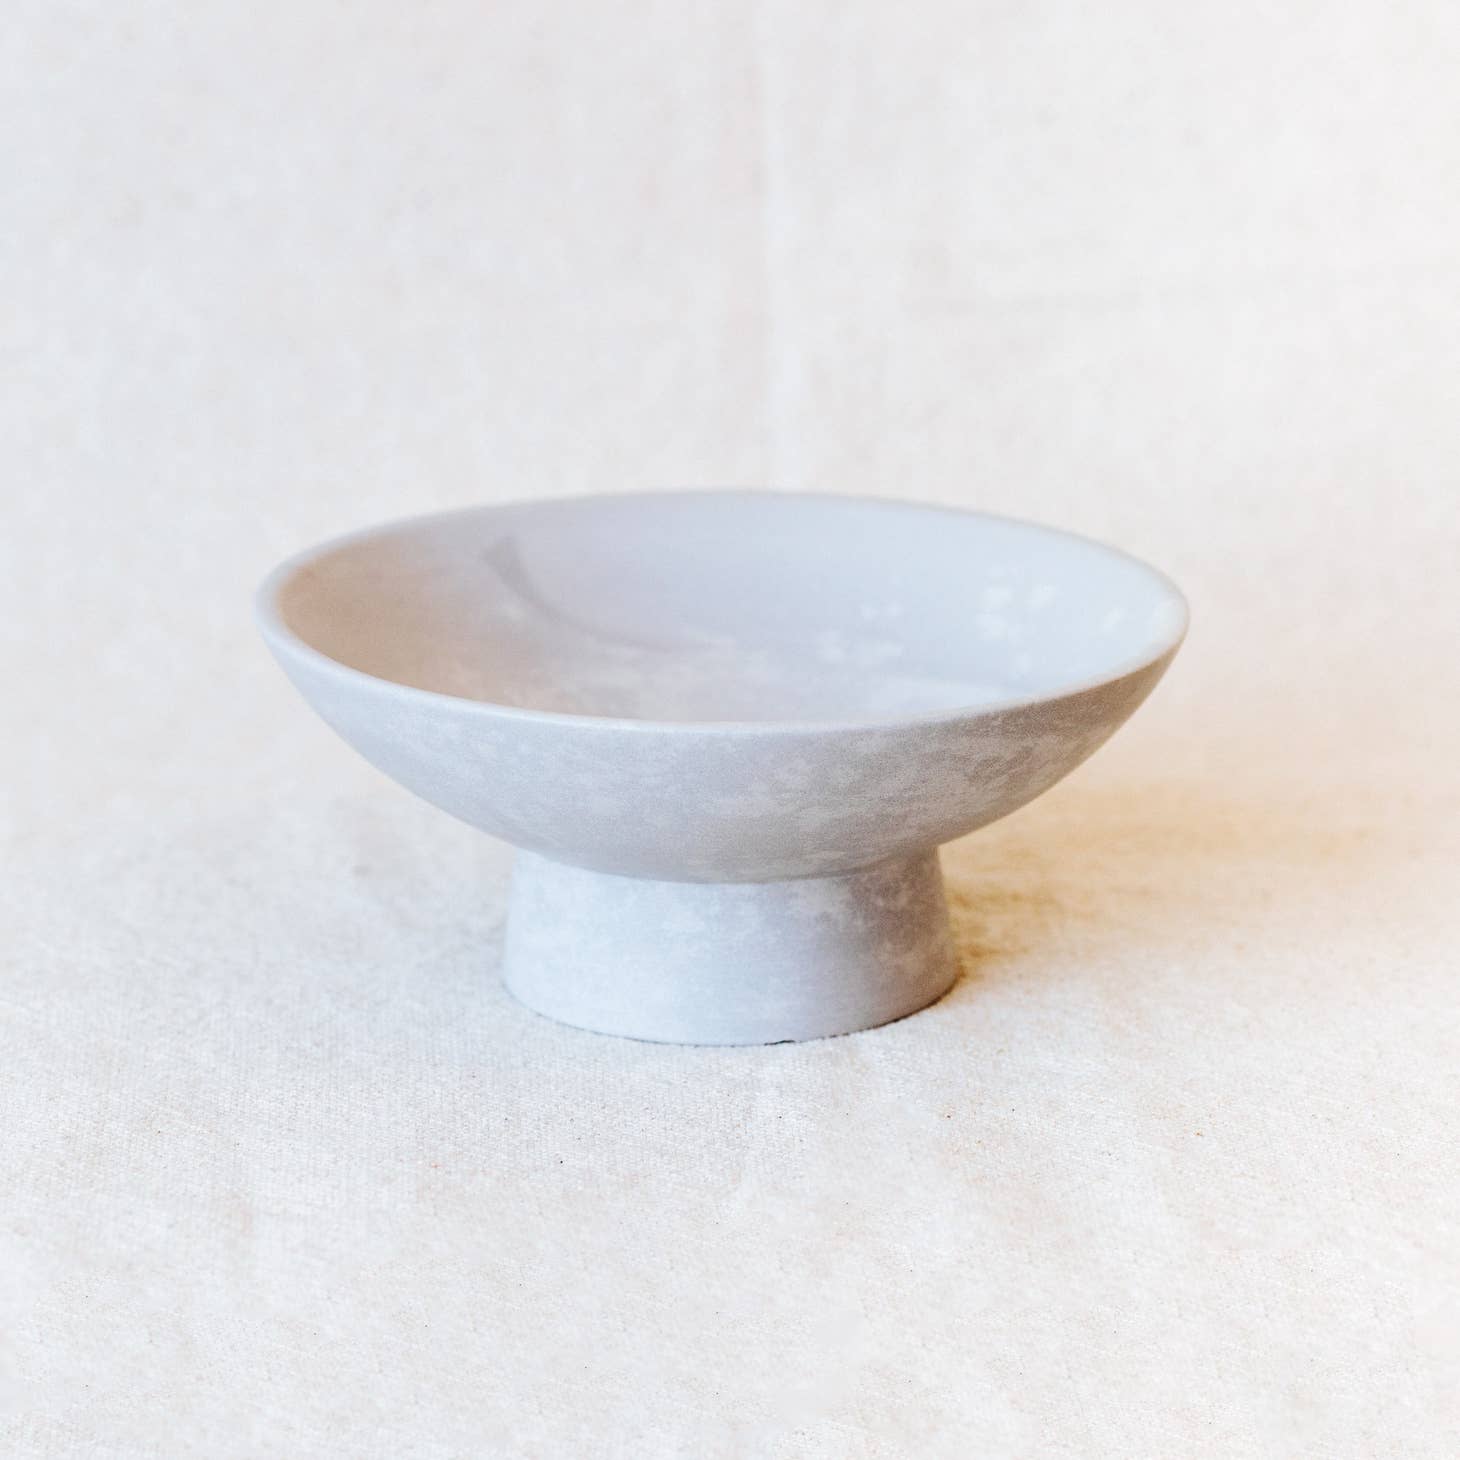 This bowl features a pedestal to boast your centerpieces & valuables.  Hand-carved from soapstone in western Kenya.